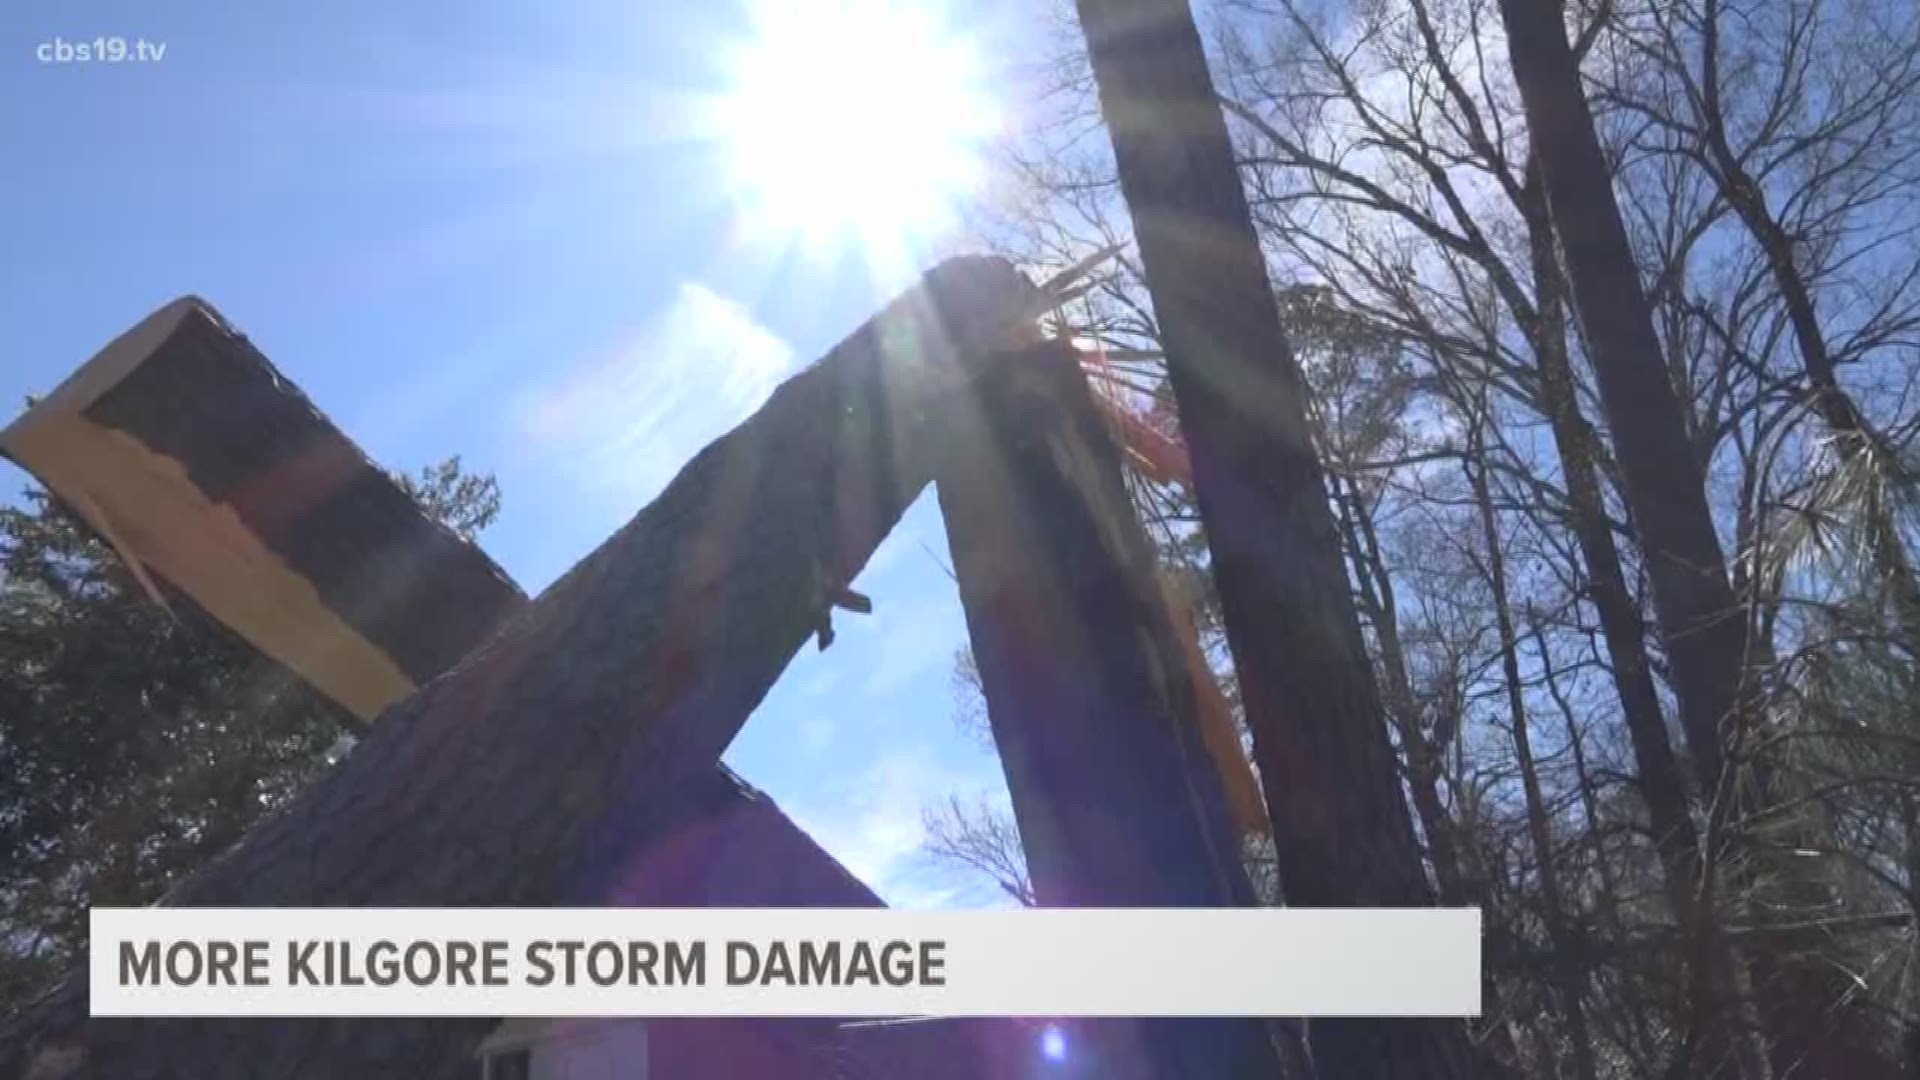 CBS19's Darcy Birden is in Kilgore after strong straight lines winds damaged many homes, leaving more than 1,000 without power.